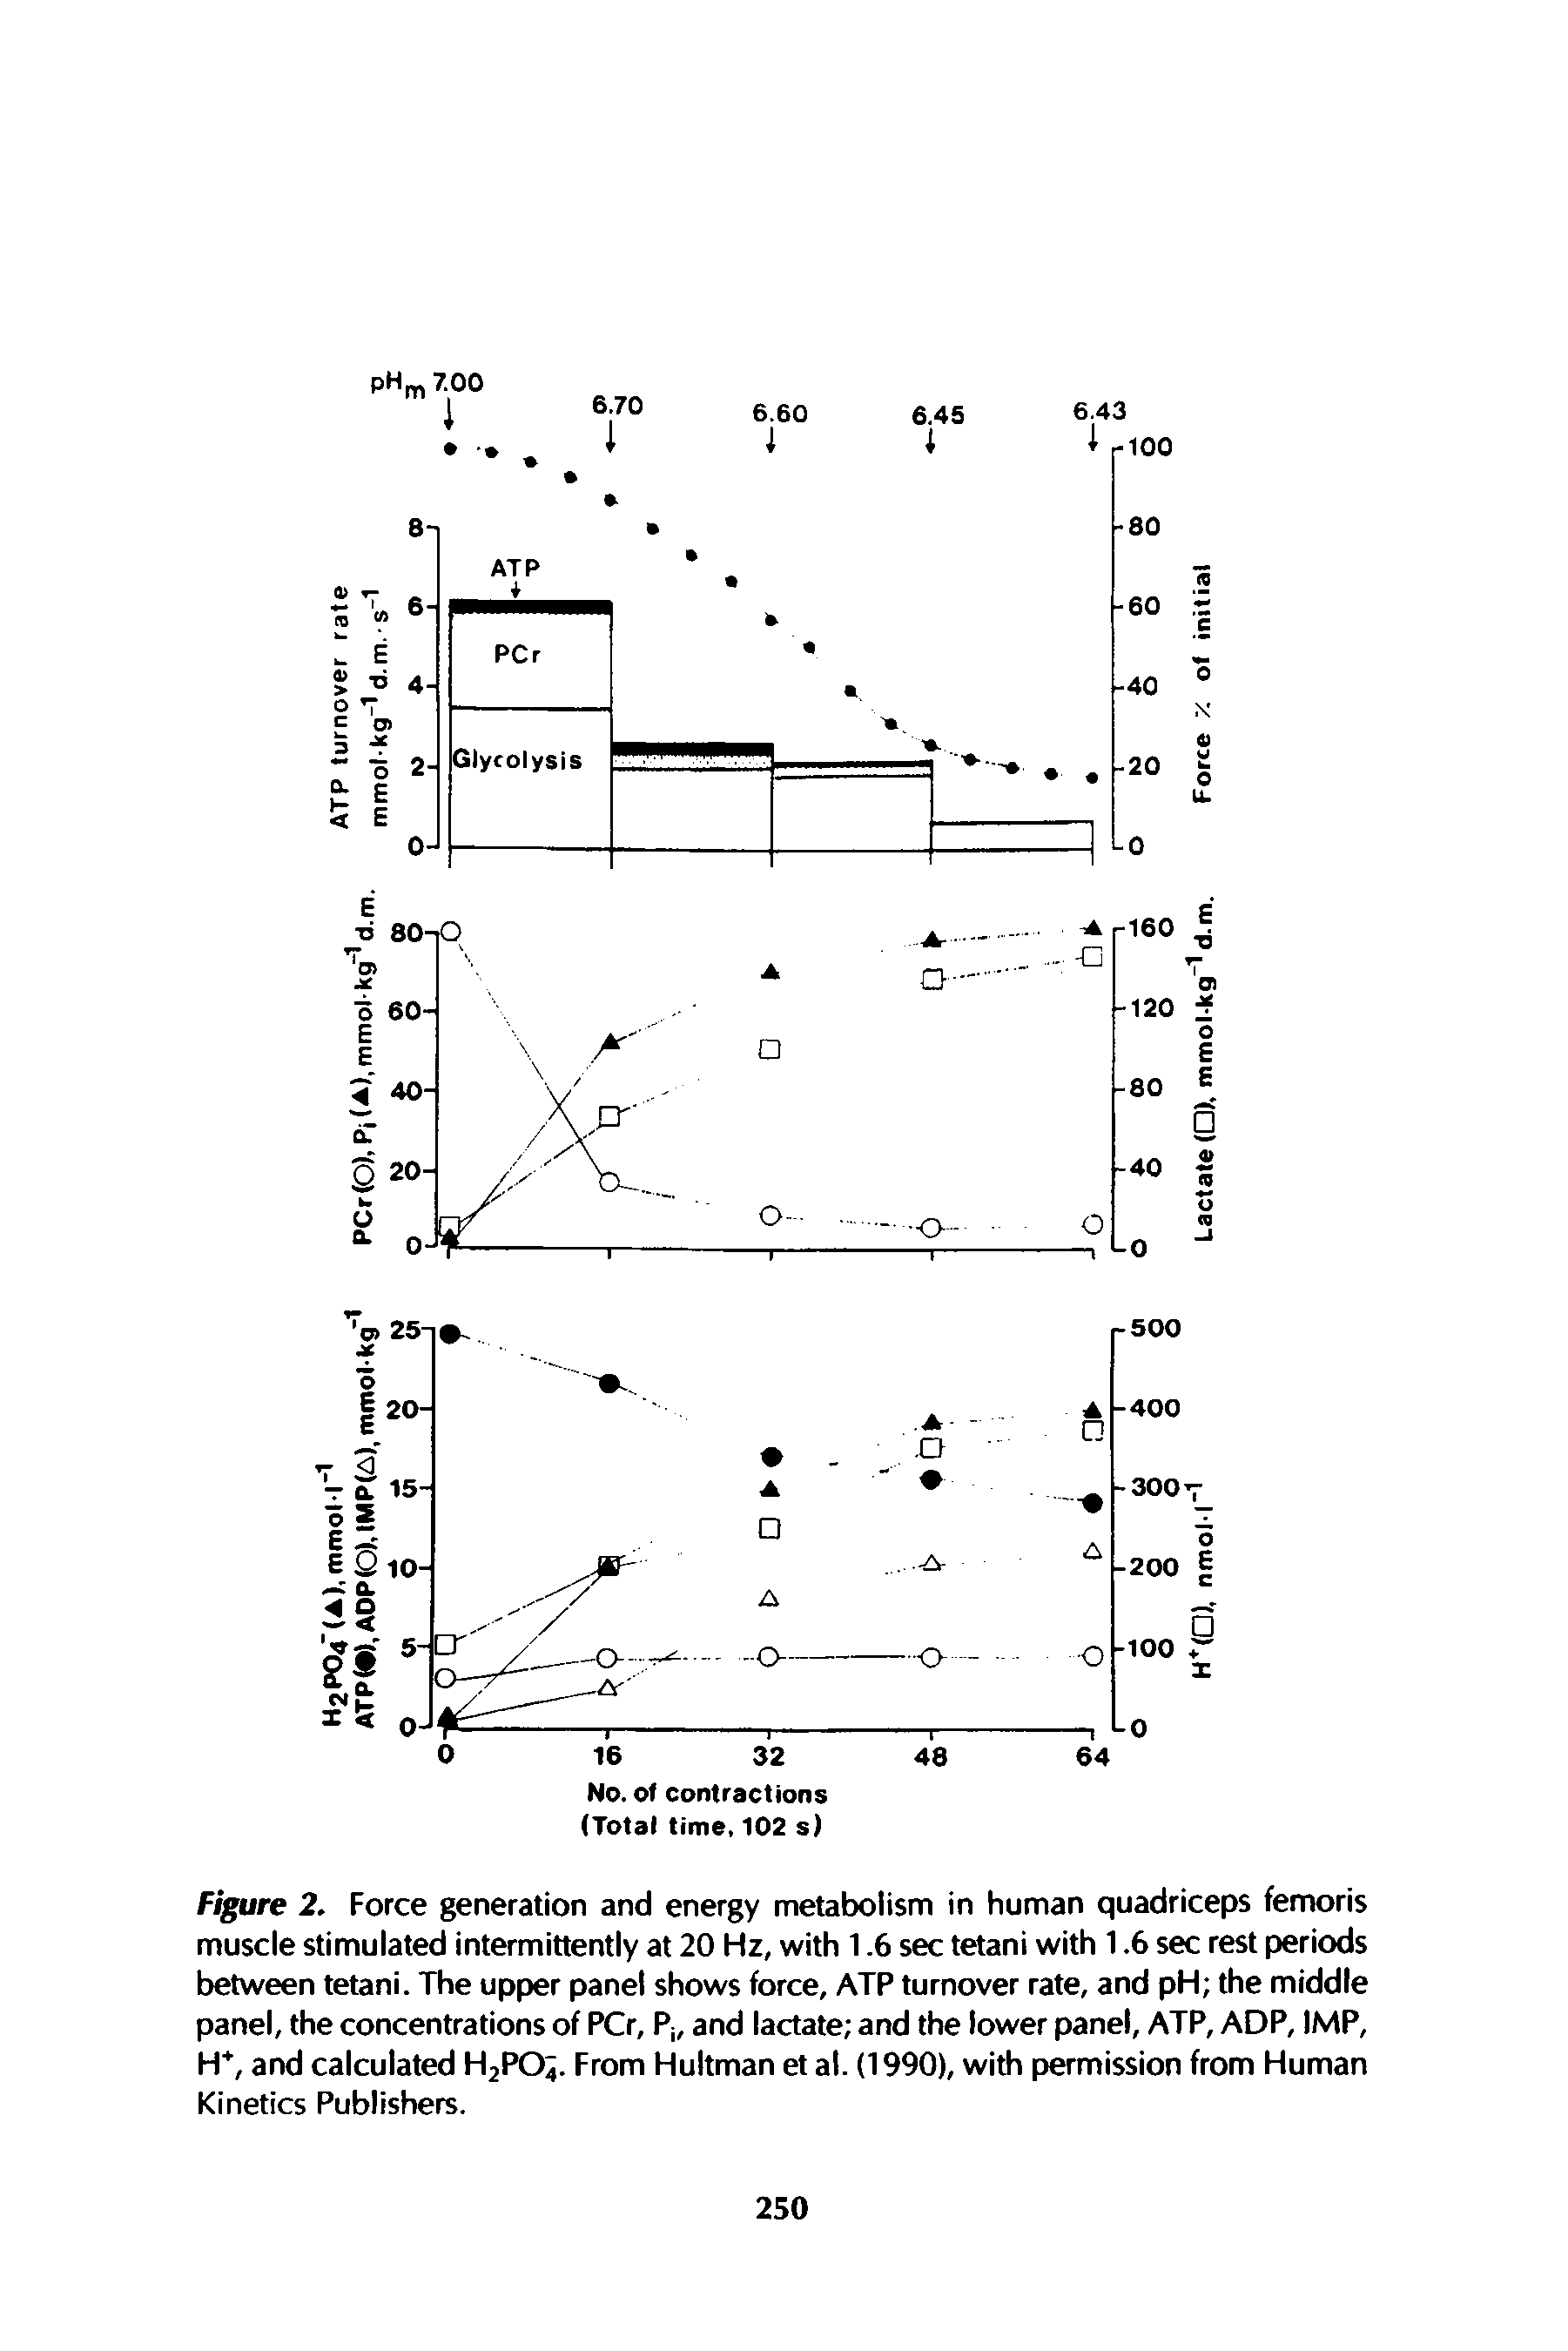 Figure 2. Force generation and energy metabolism in human quadriceps femoris muscle stimulated intermittently at 20 Hz, with 1.6 sec tetani with 1.6 sec rest periods between tetani. The upper panel shows force, ATP turnover rate, and pH the middle panel, the concentrations of PCr, P and lactate and the lower panel, ATP, ADP, IMP, H, and calculated H2PO4. From Hultman et al. (1990), with permission from Human Kinetics Publishers.